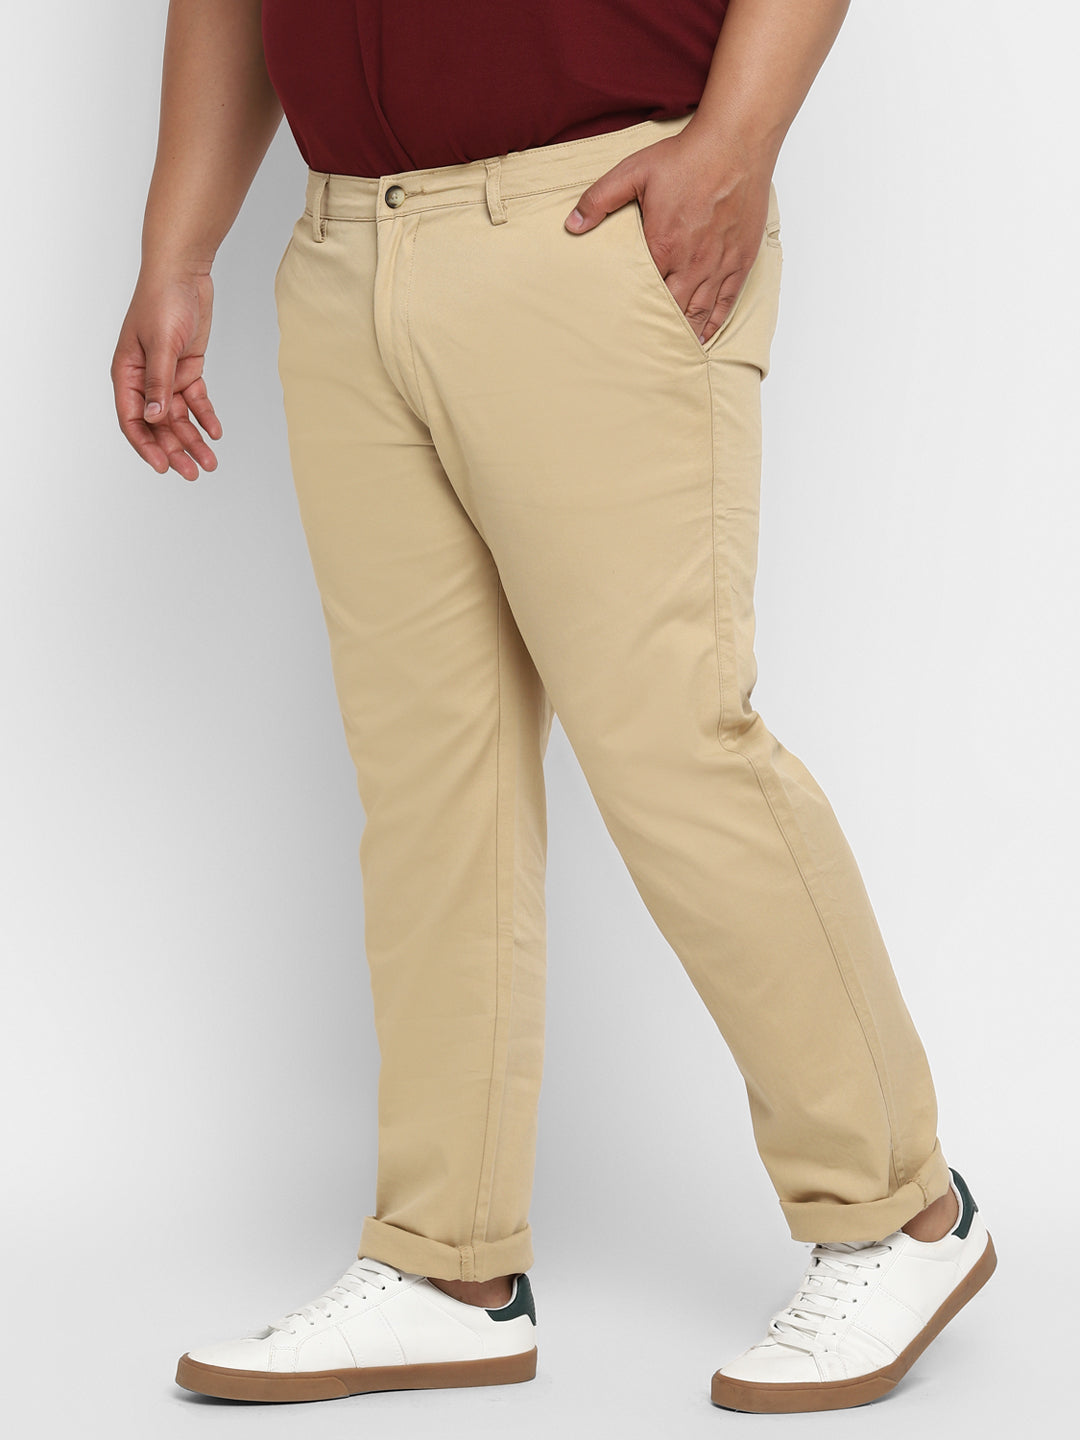 Plus Men's Beige Cotton Regular Fit Casual Chinos Trousers Stretch